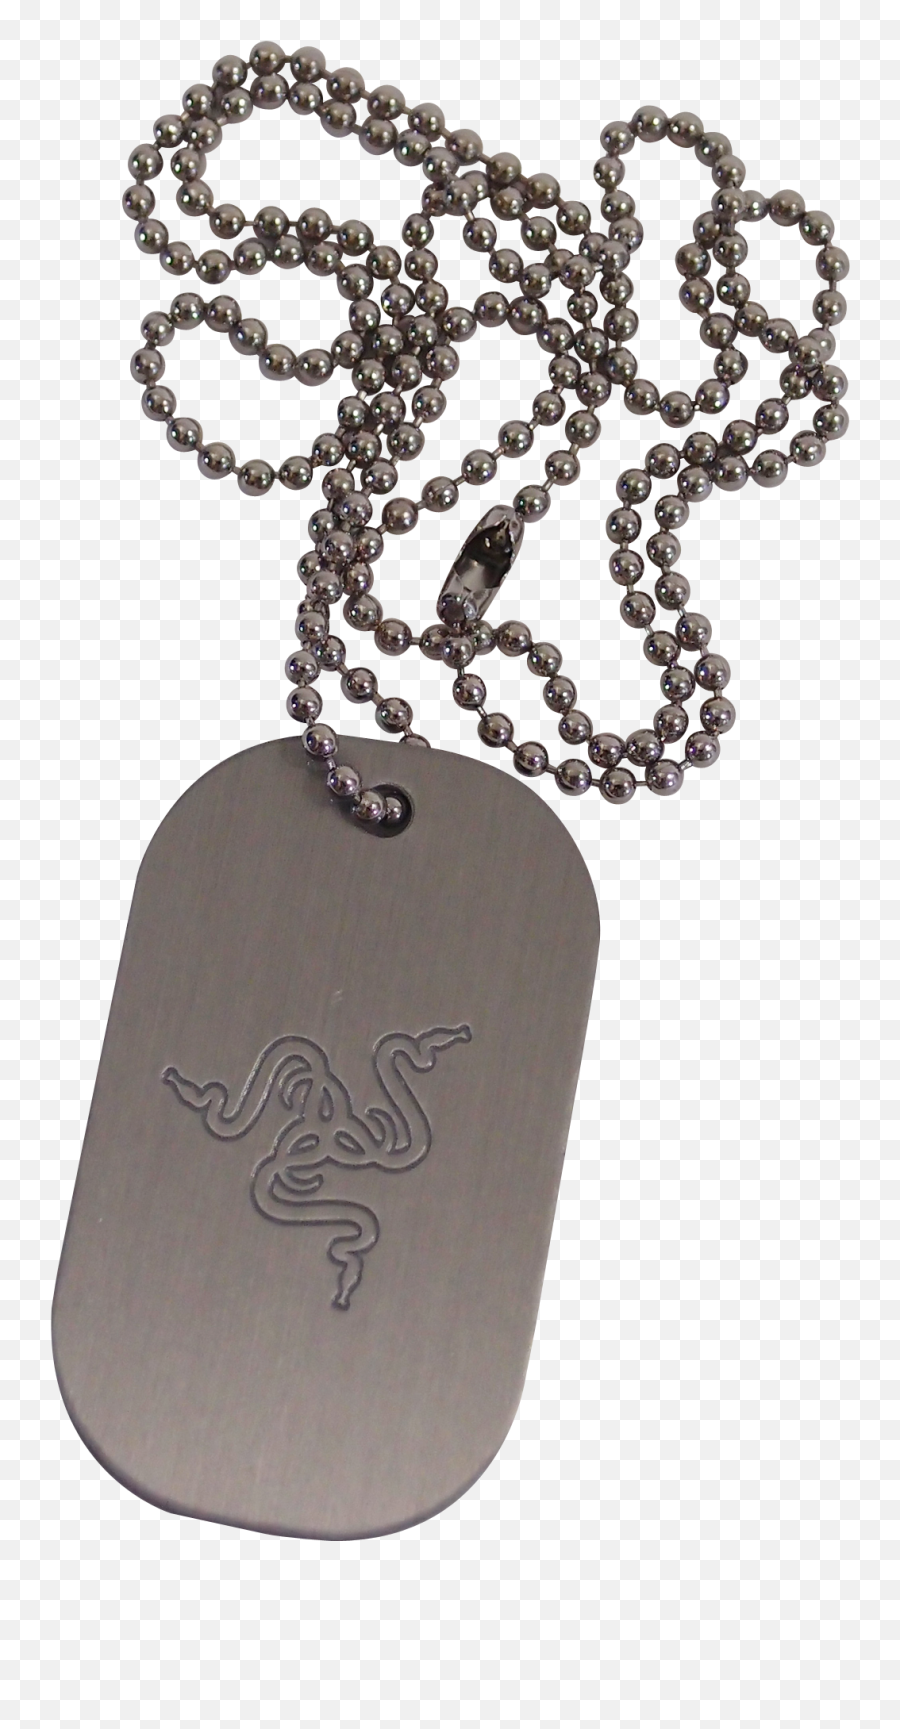 Blank Dog Tag Png - Dog Tag Razer Full Size Png Download Dog Tag Blank Png,Razer Png